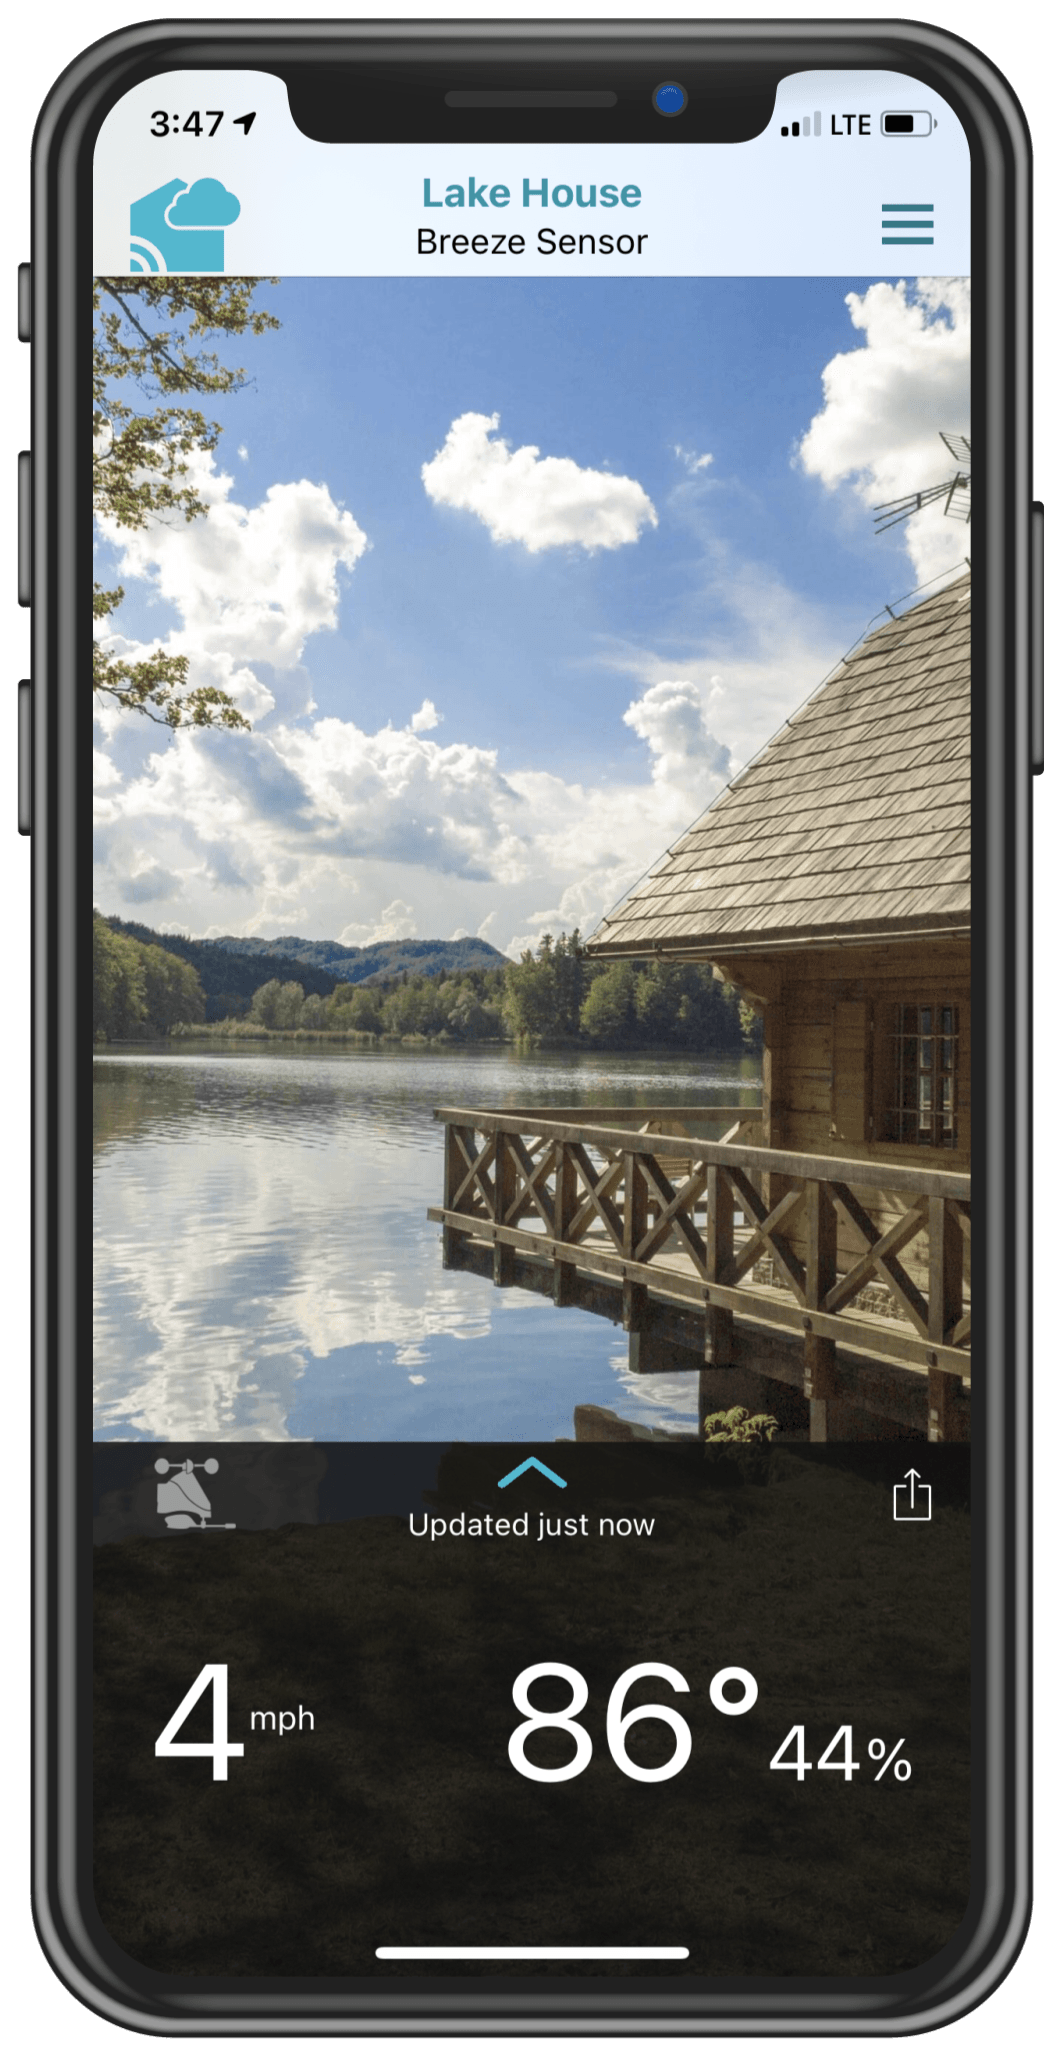 A phone showing the main La Crosse View app page for a lake house.